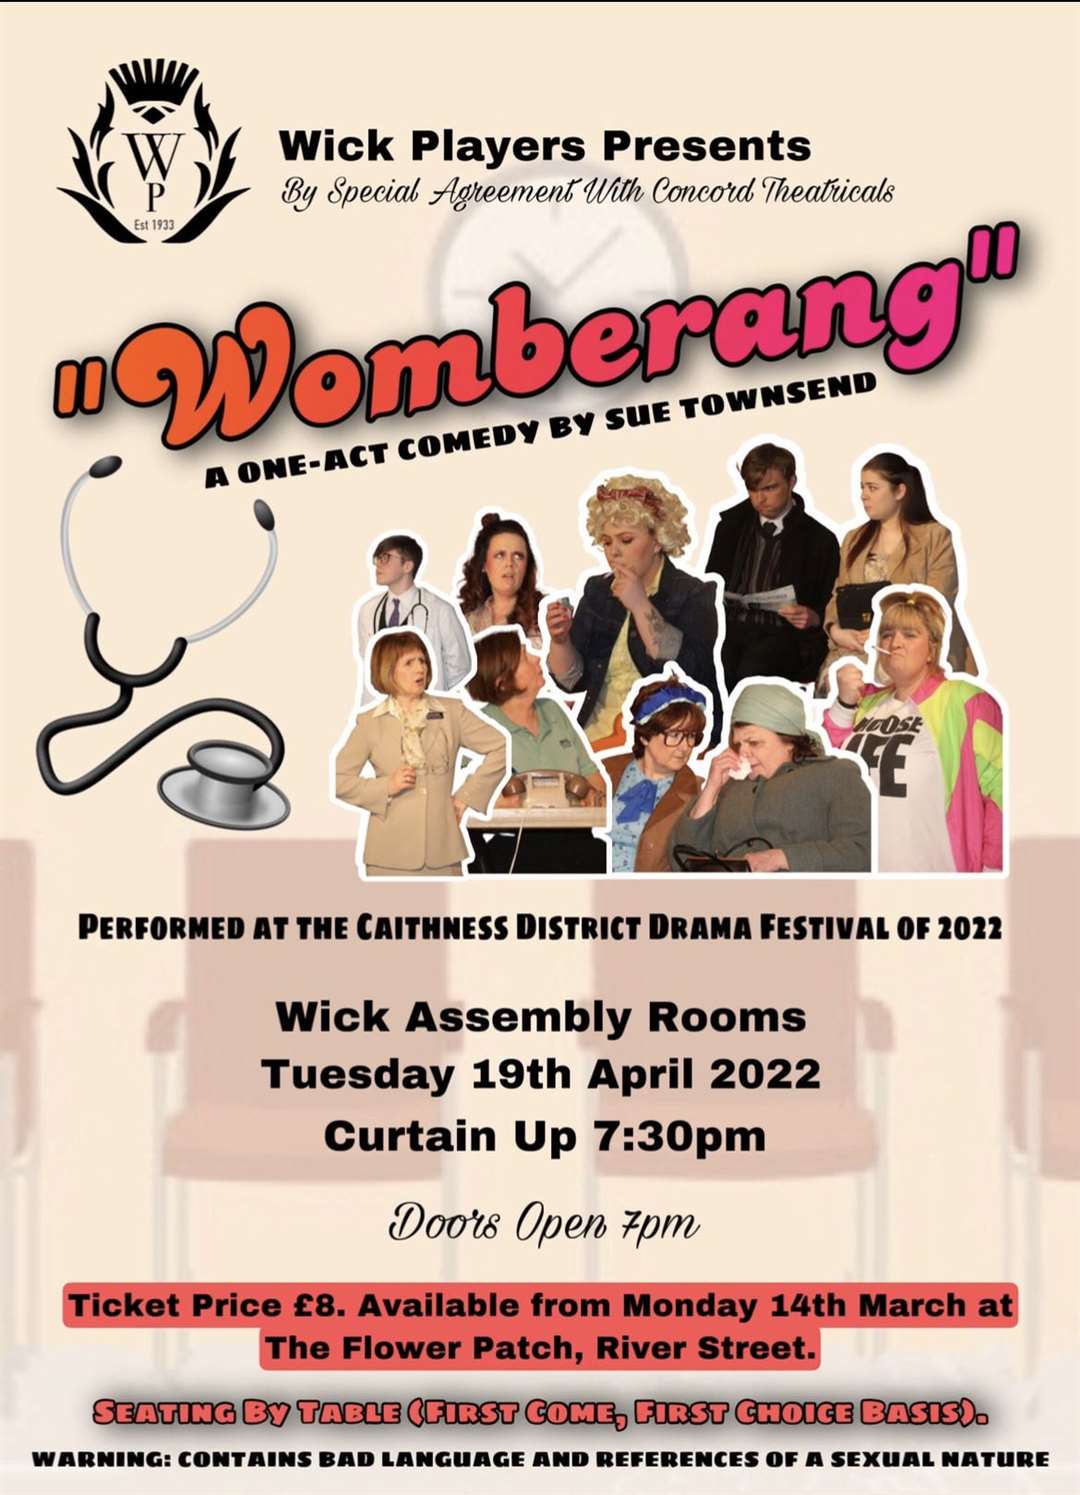 Womberang will be performed in Wick on Tuesday, April 19.